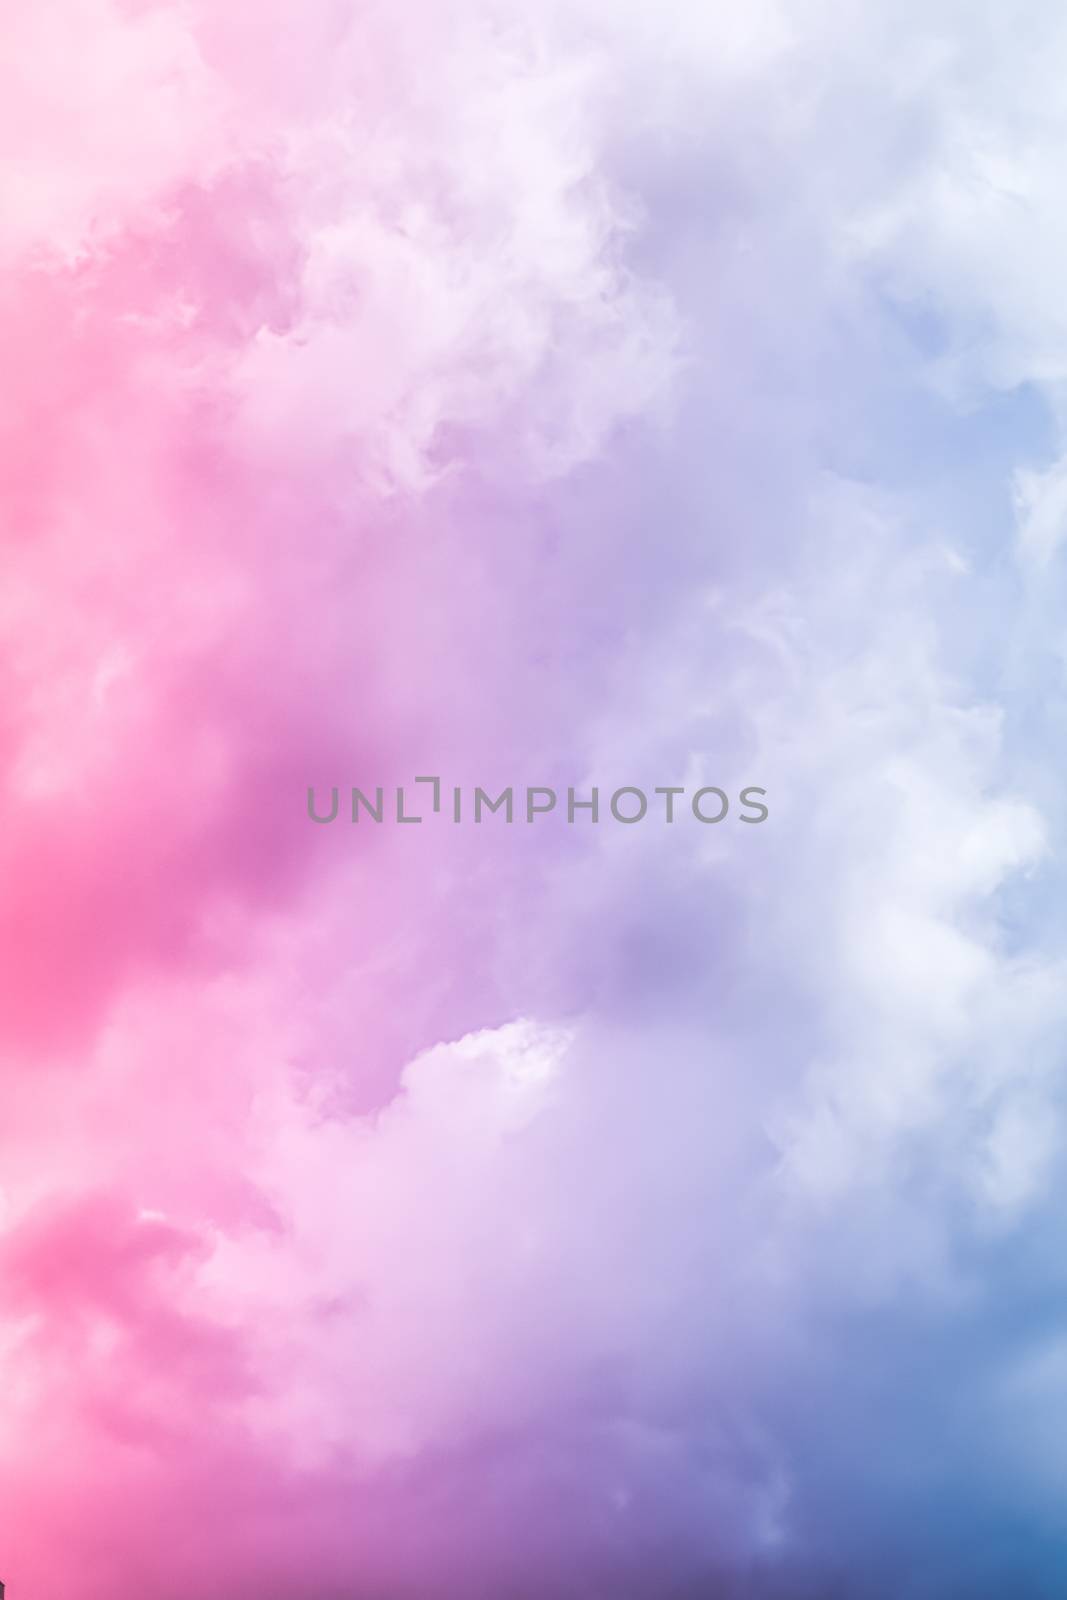 Fantasy blue sky and clouds, spiritual and nature backgrounds